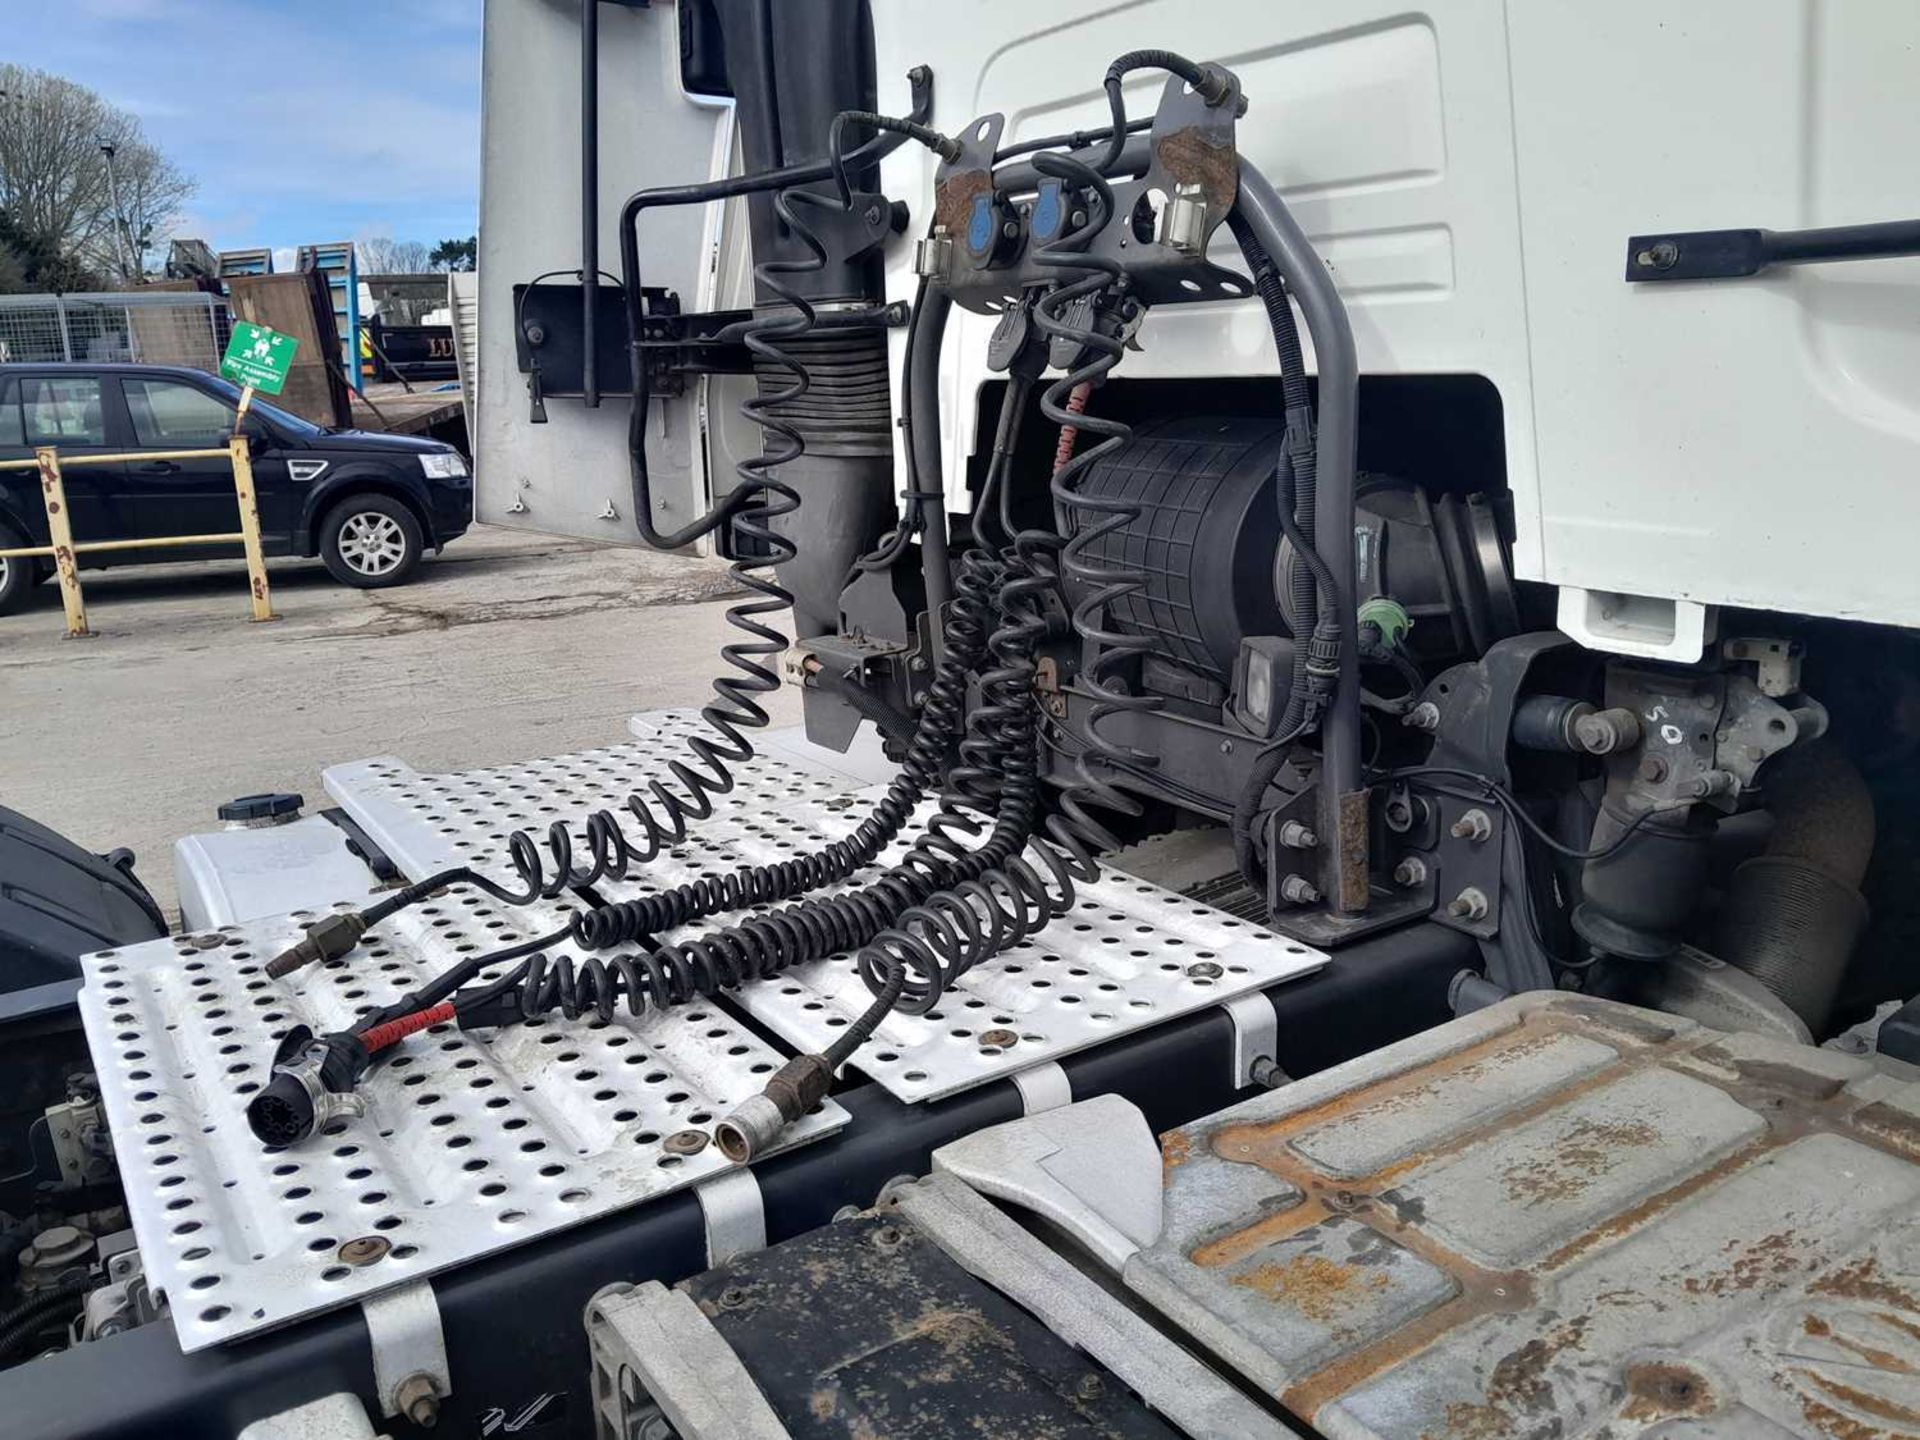 2015 Renault T460 6x2 Midlift, Automatic Gear Box, A/C - Image 11 of 22